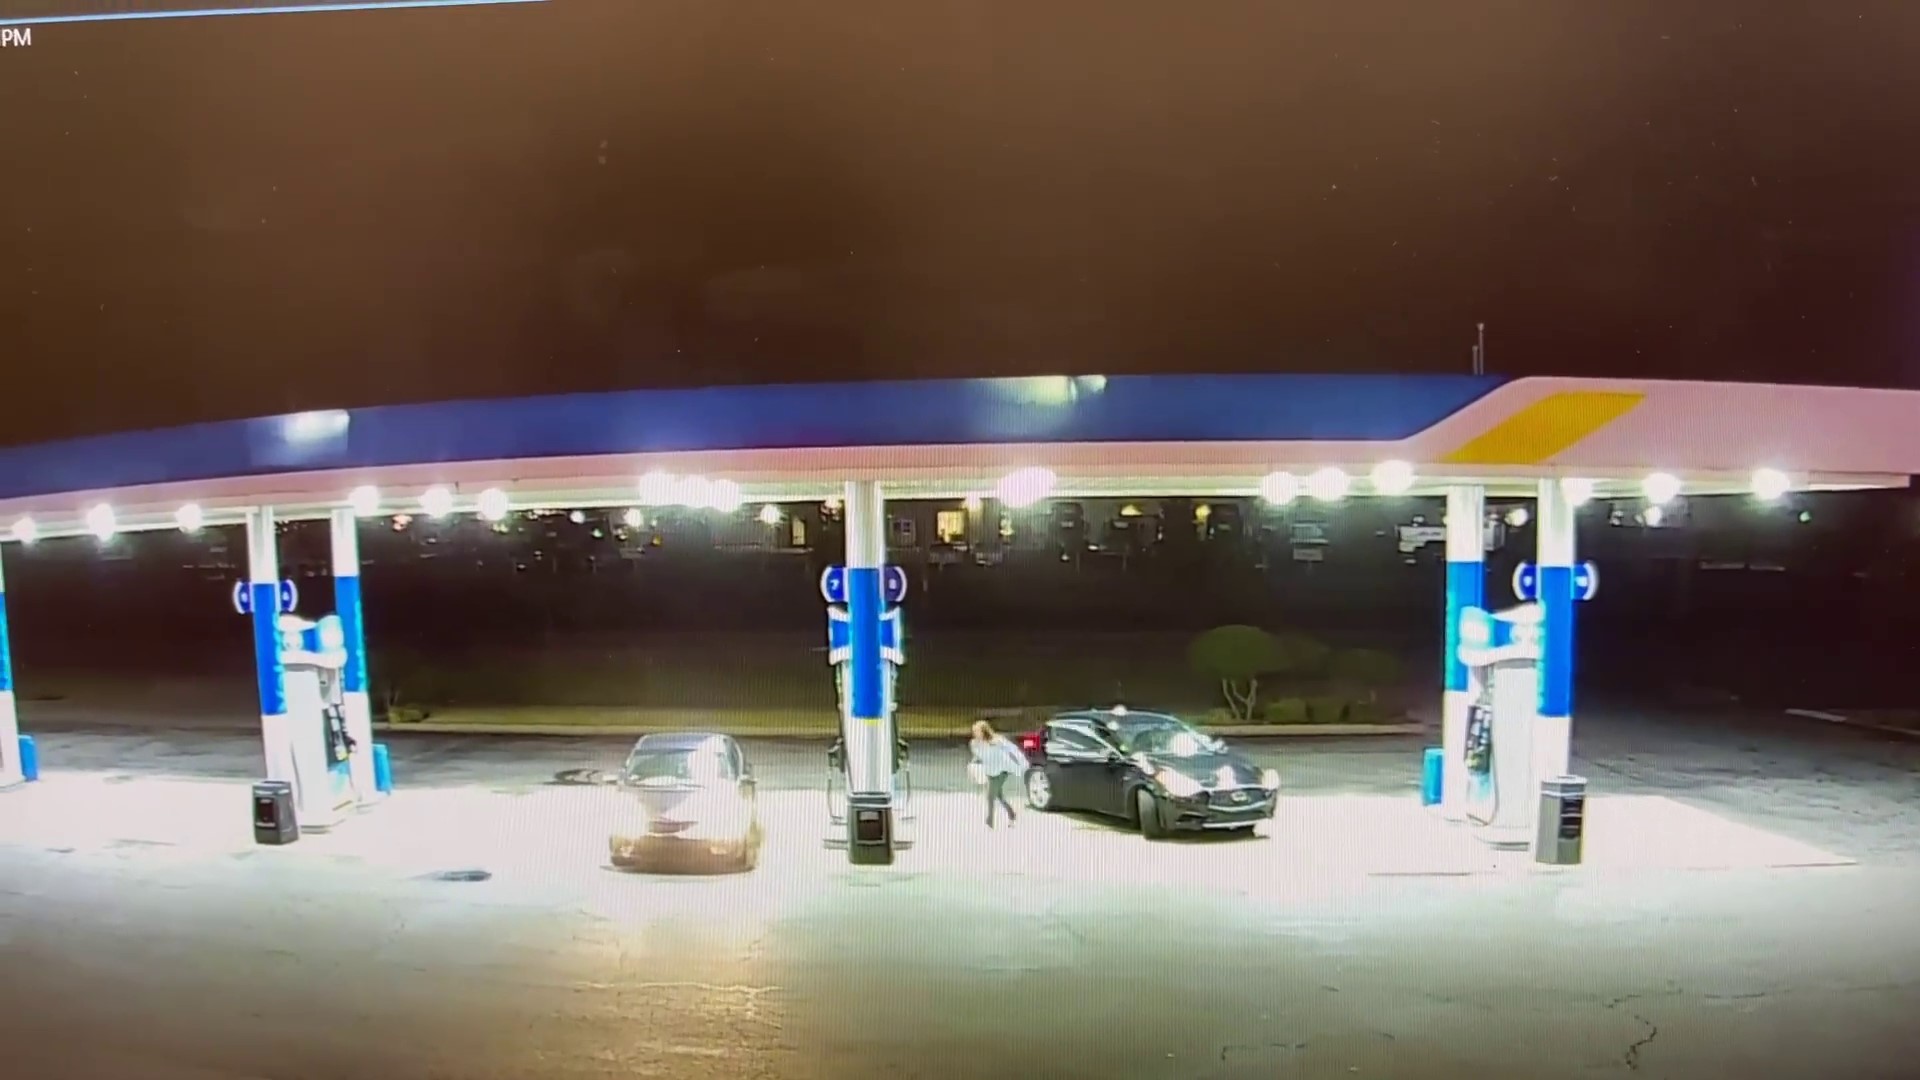 An alleged car theft at a Fort Smith gas station was caught on video.